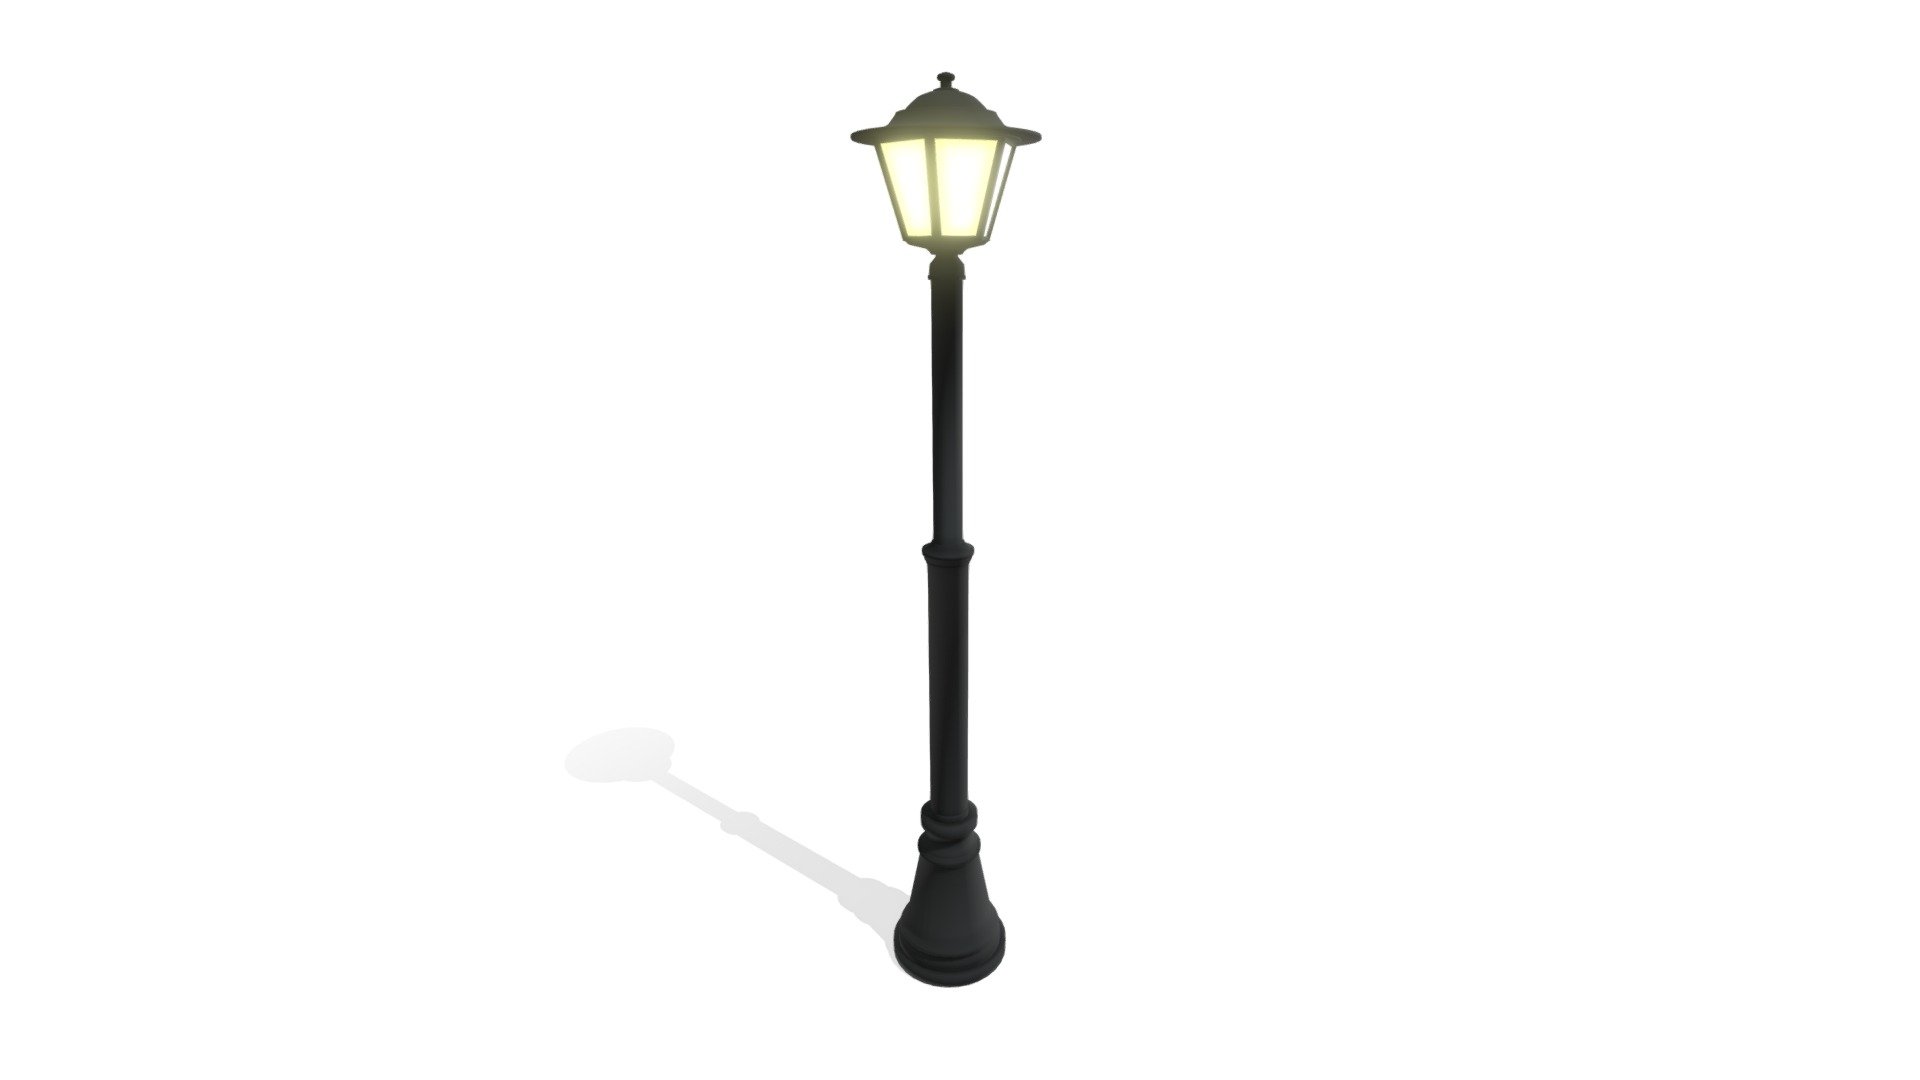 Street Light Lamp made in blender 2.90

It was fully modeled and rendered in Blender (Version 2.90)

I hope you like it!



Features:
- Model is fully textured with all materials applied.
- All textures and materials are included.
- Everything is named and organized properly 3d model